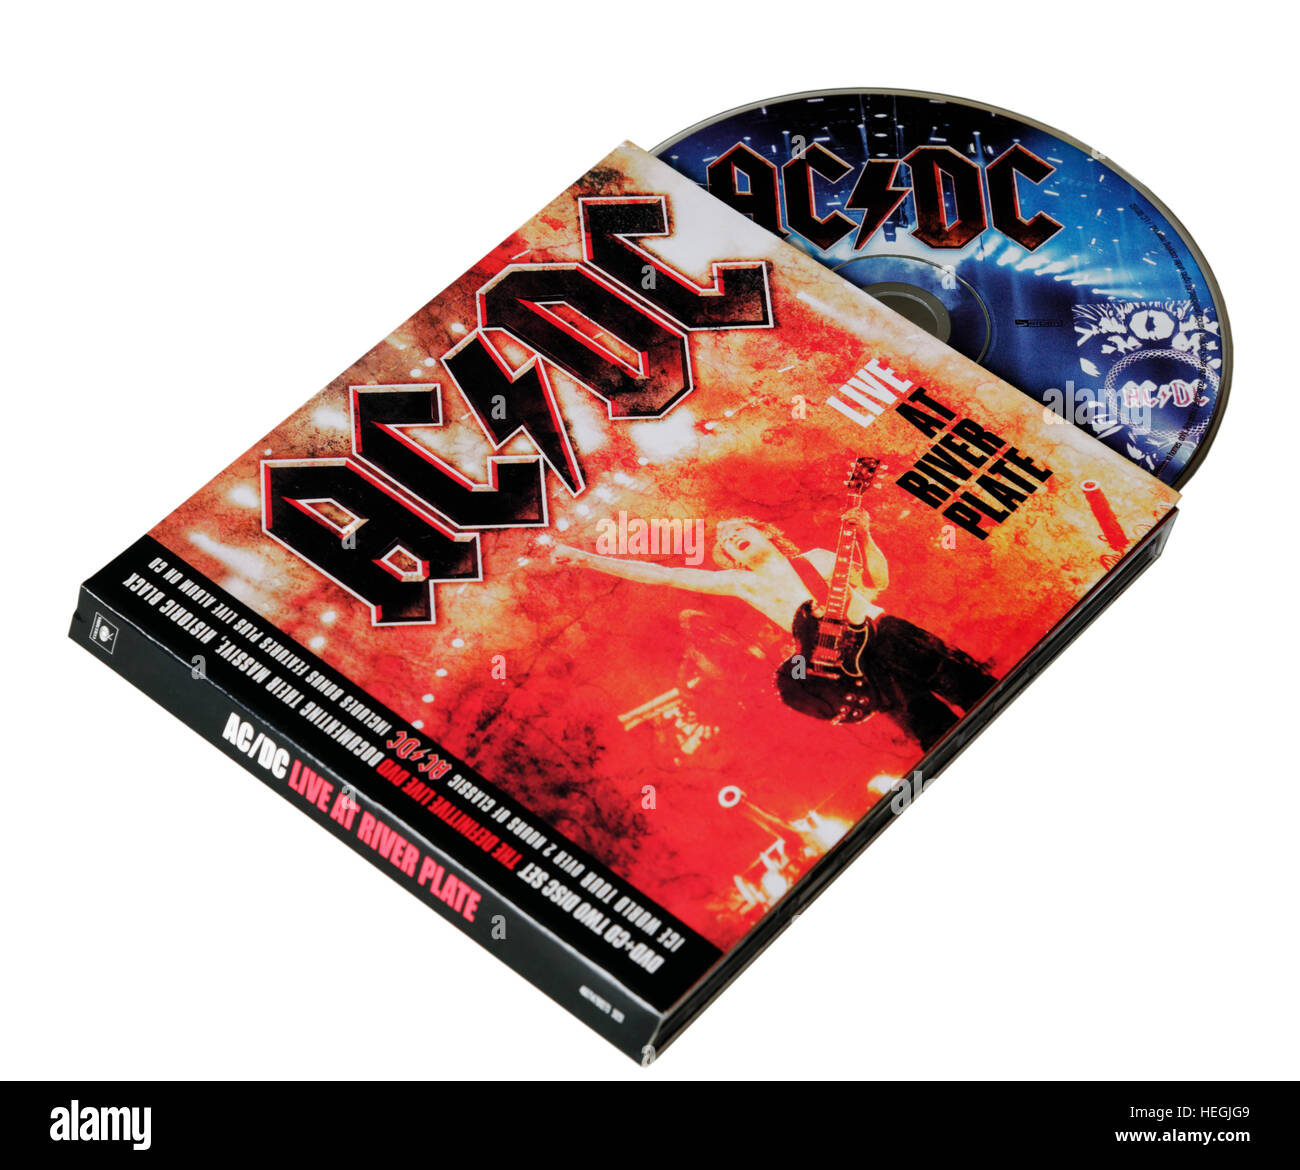 AC/DC Live River DVD and CD Stock Photo Alamy